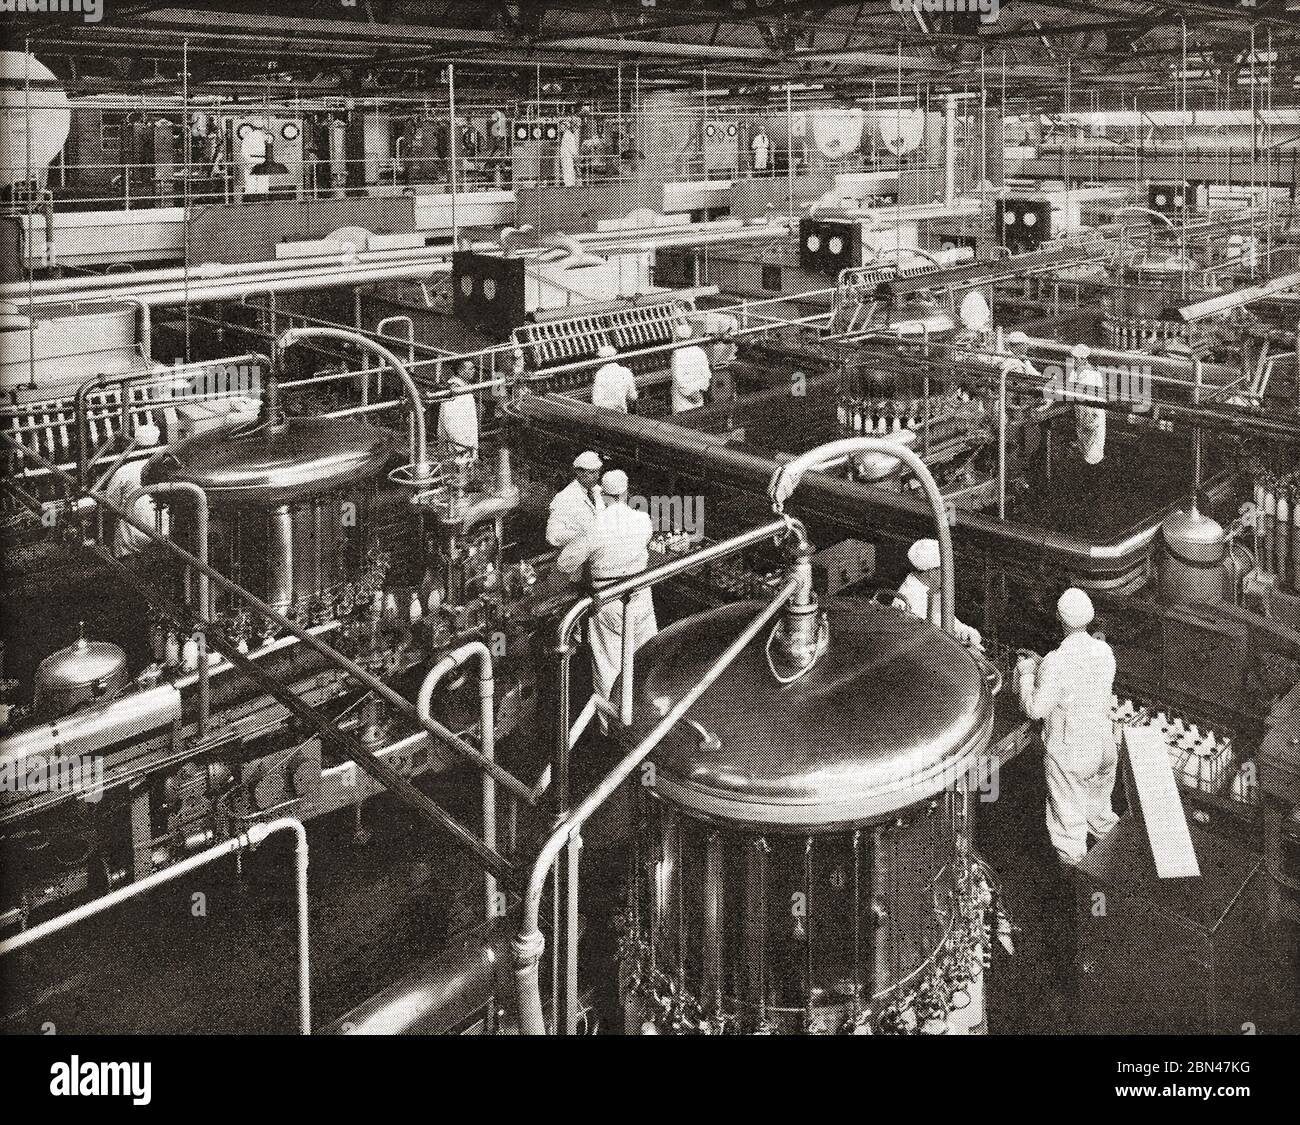 Dairy Industry in Britain - A circa 1930's photograph of the UK Express Dairies milk bottling plant. Stock Photo